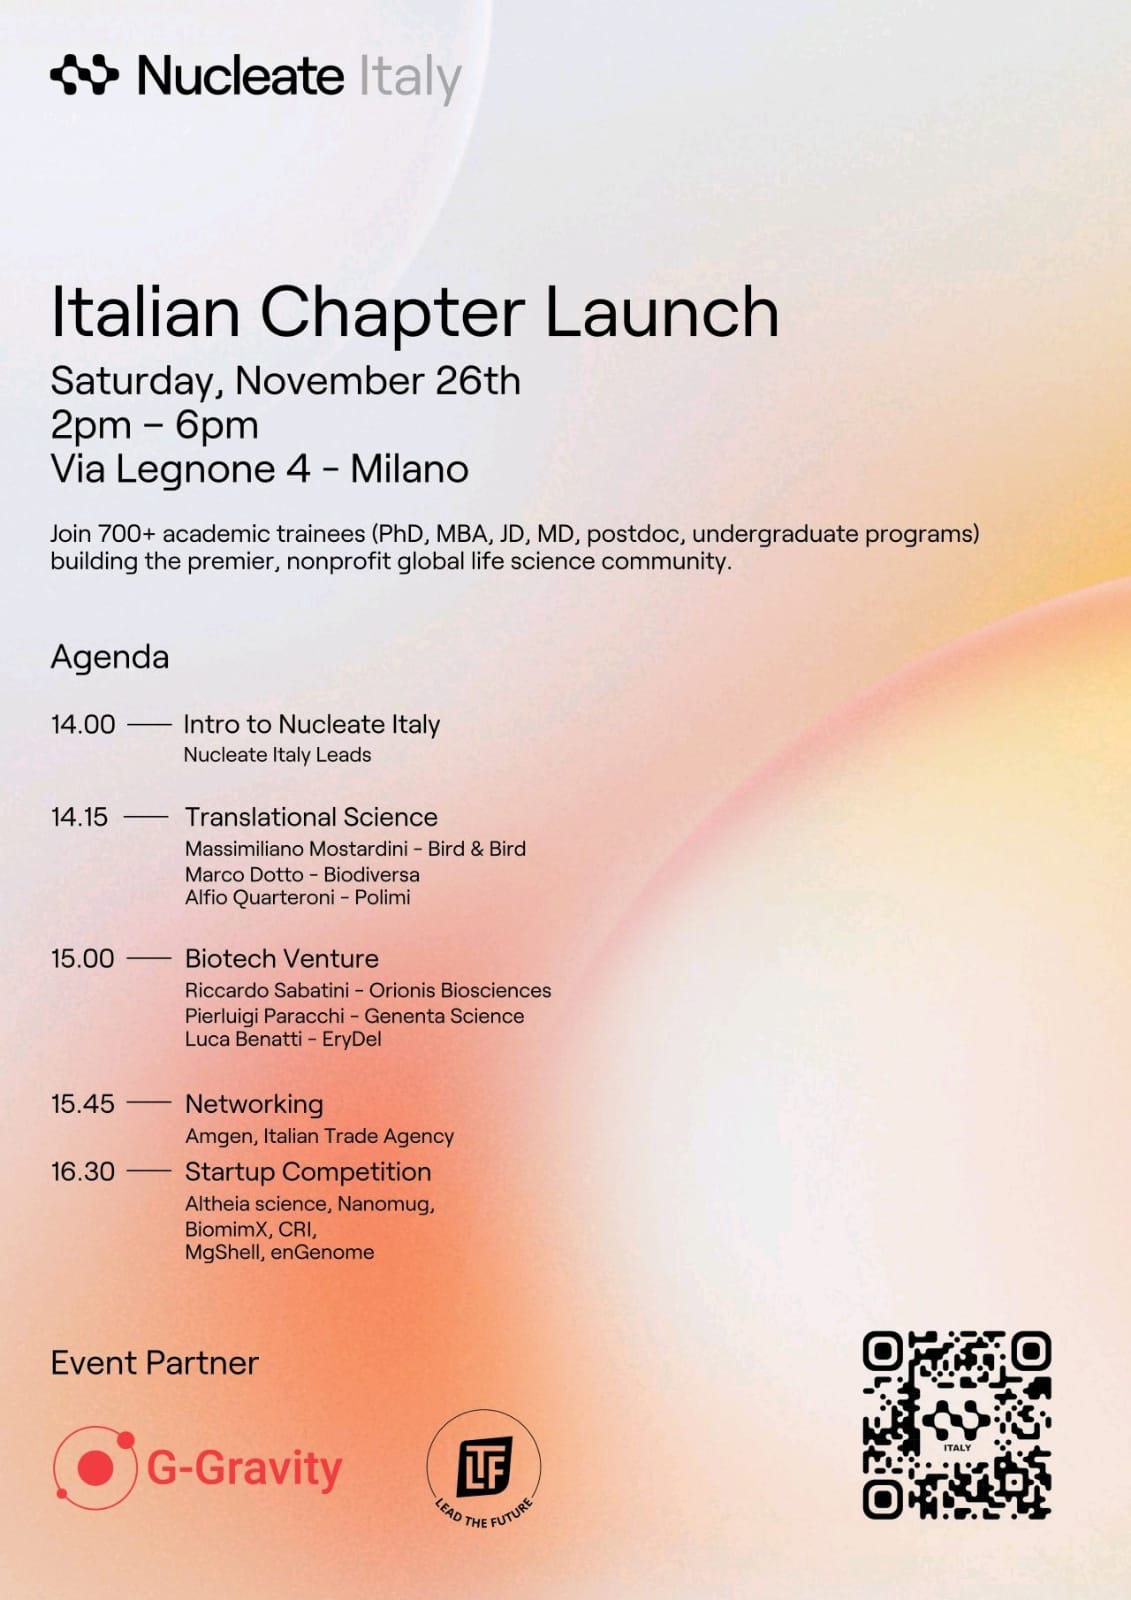 ITALIAN CHAPTER LAUNCH - NUCLEATE ITALY